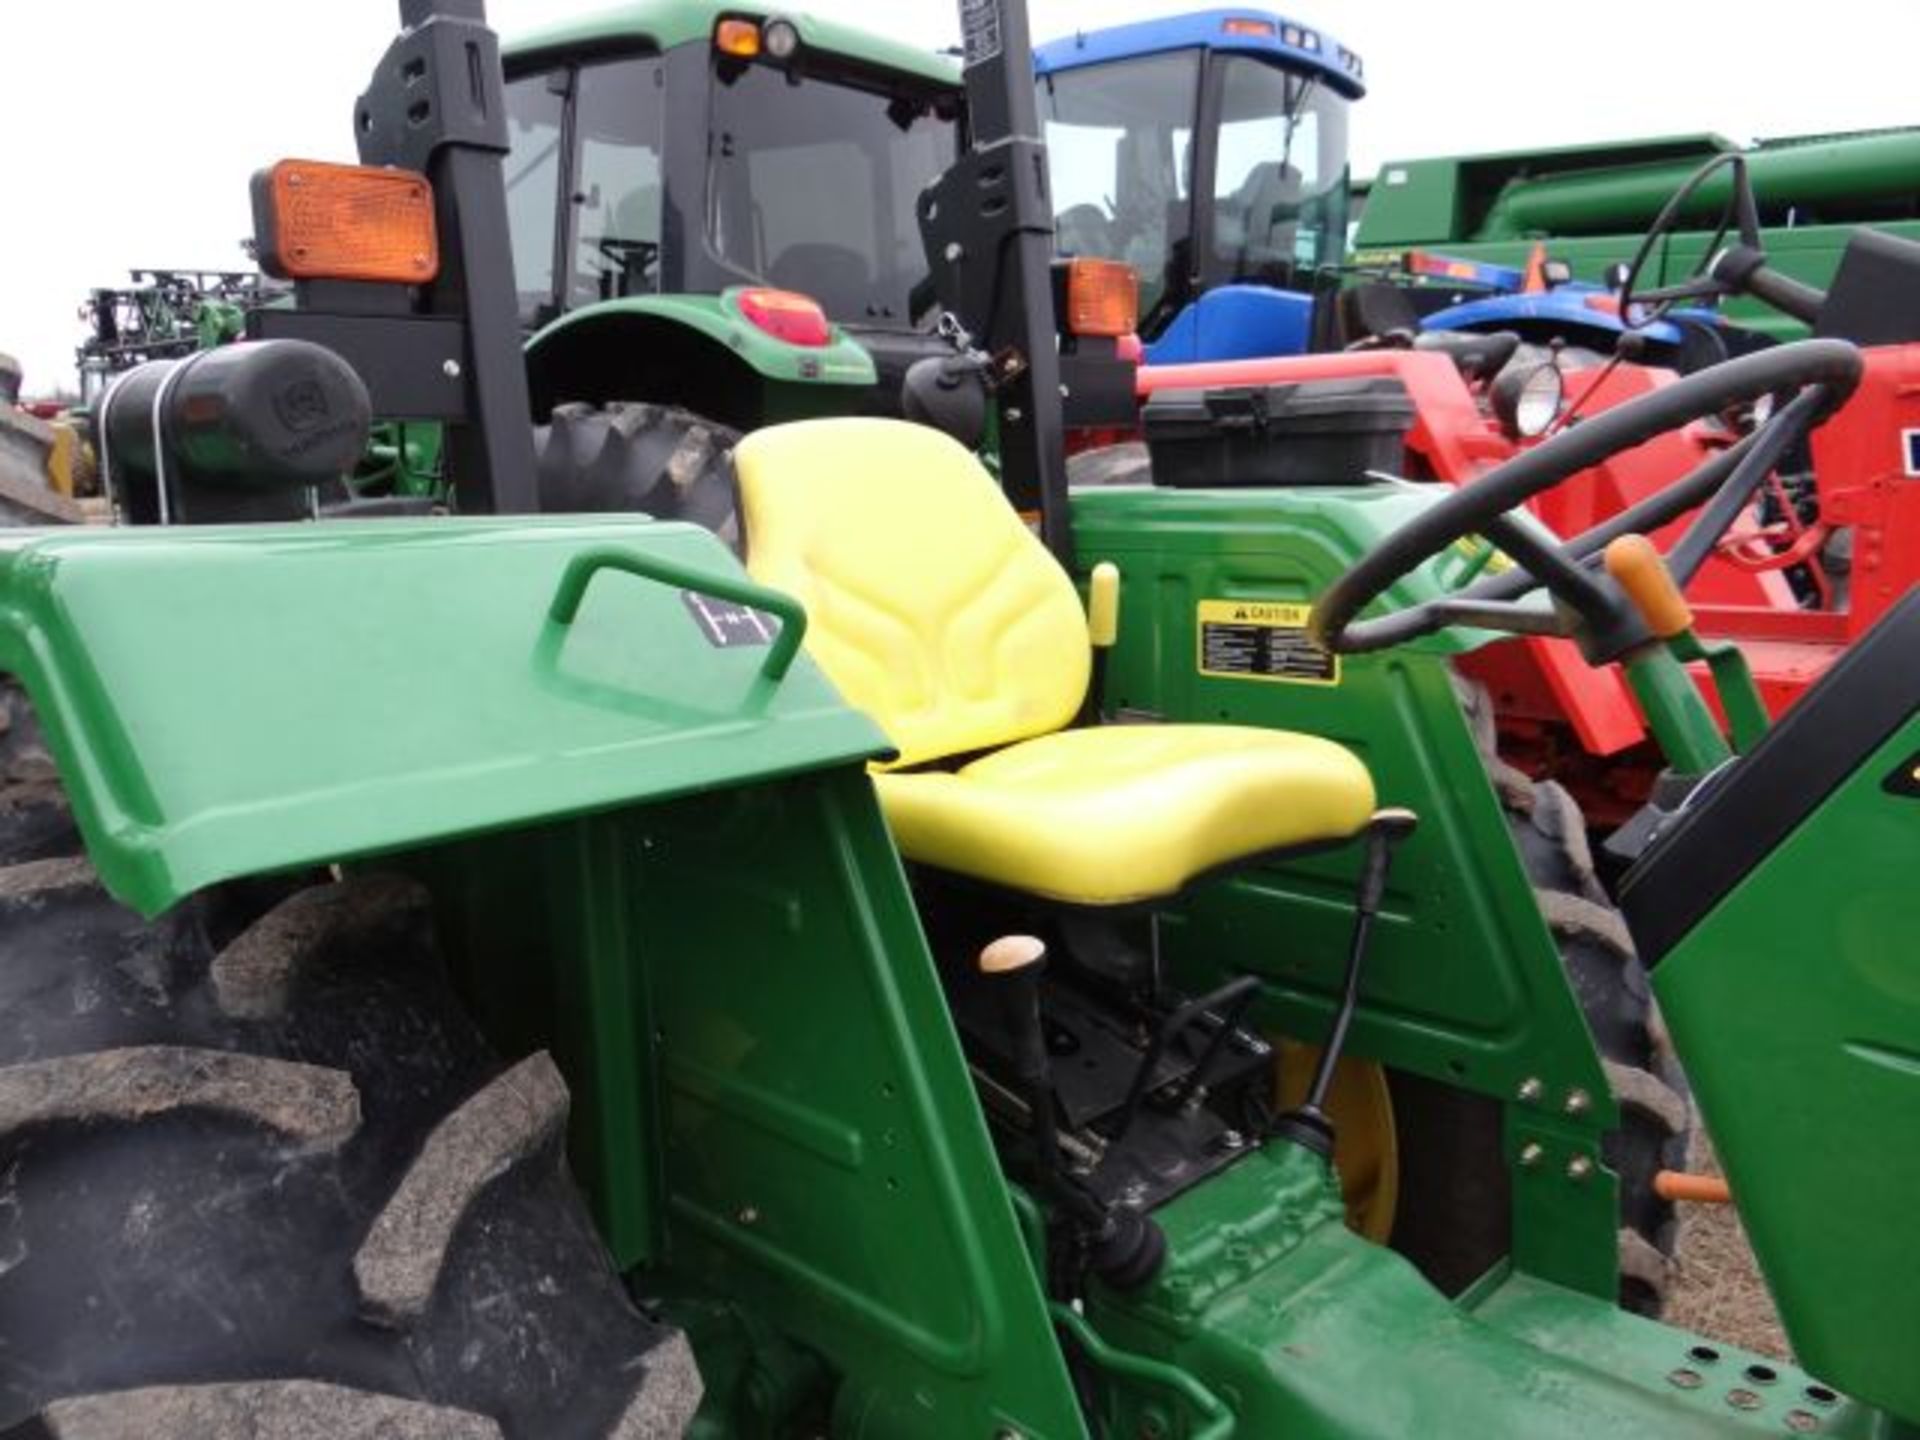 Lot # 1207 JD 5045D Tractor, 2012 #110115, 342 hrs, 2wd, 1 SCV - Image 3 of 4